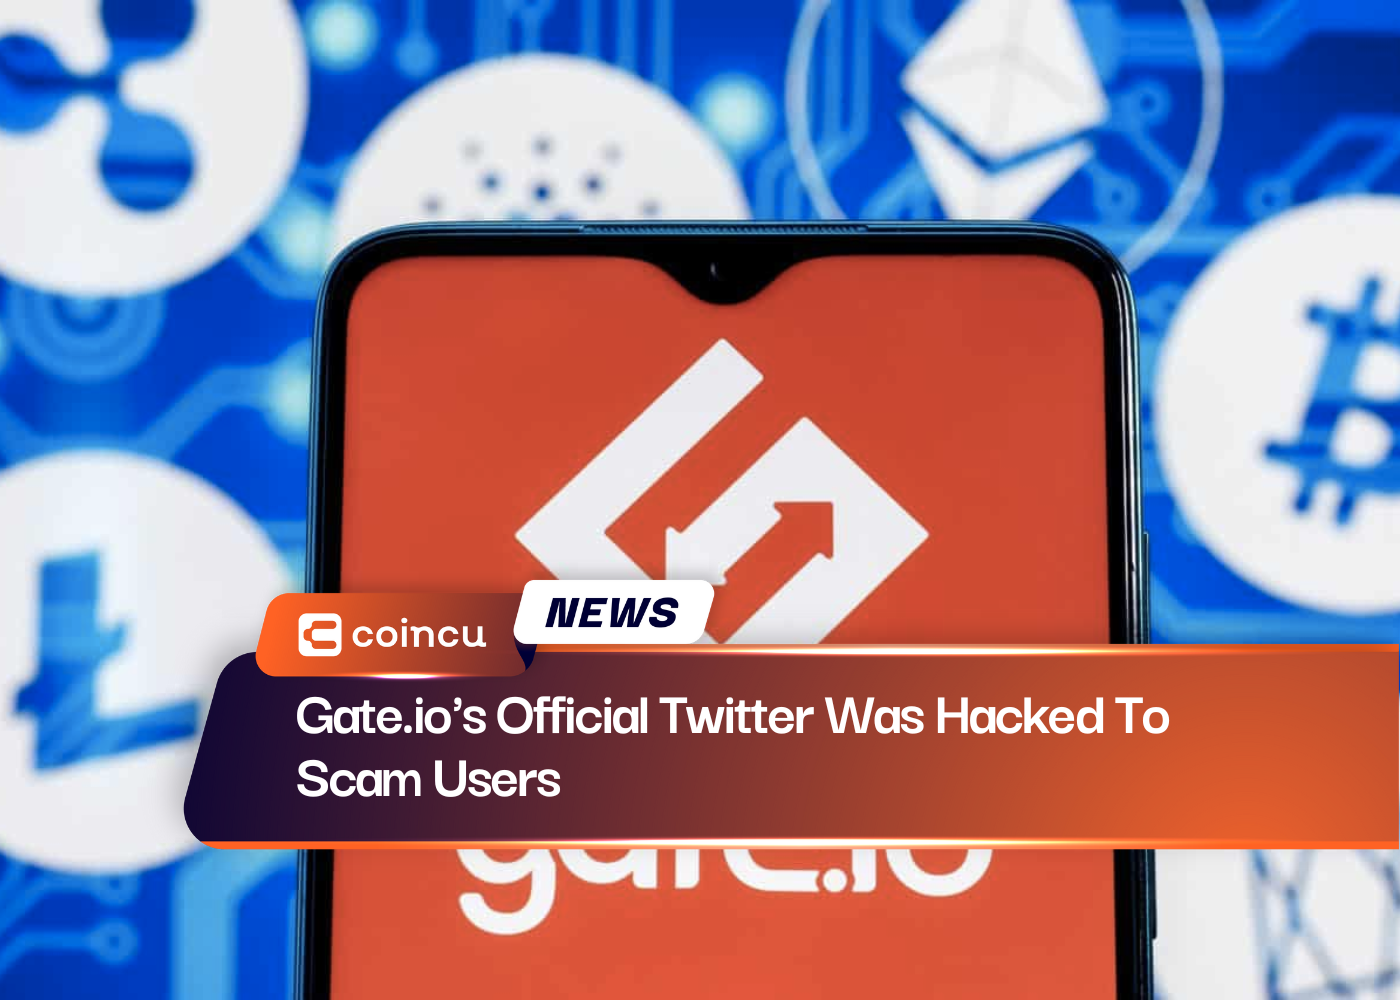 Gate.io's Official Twitter Was Hacked To Scam Users